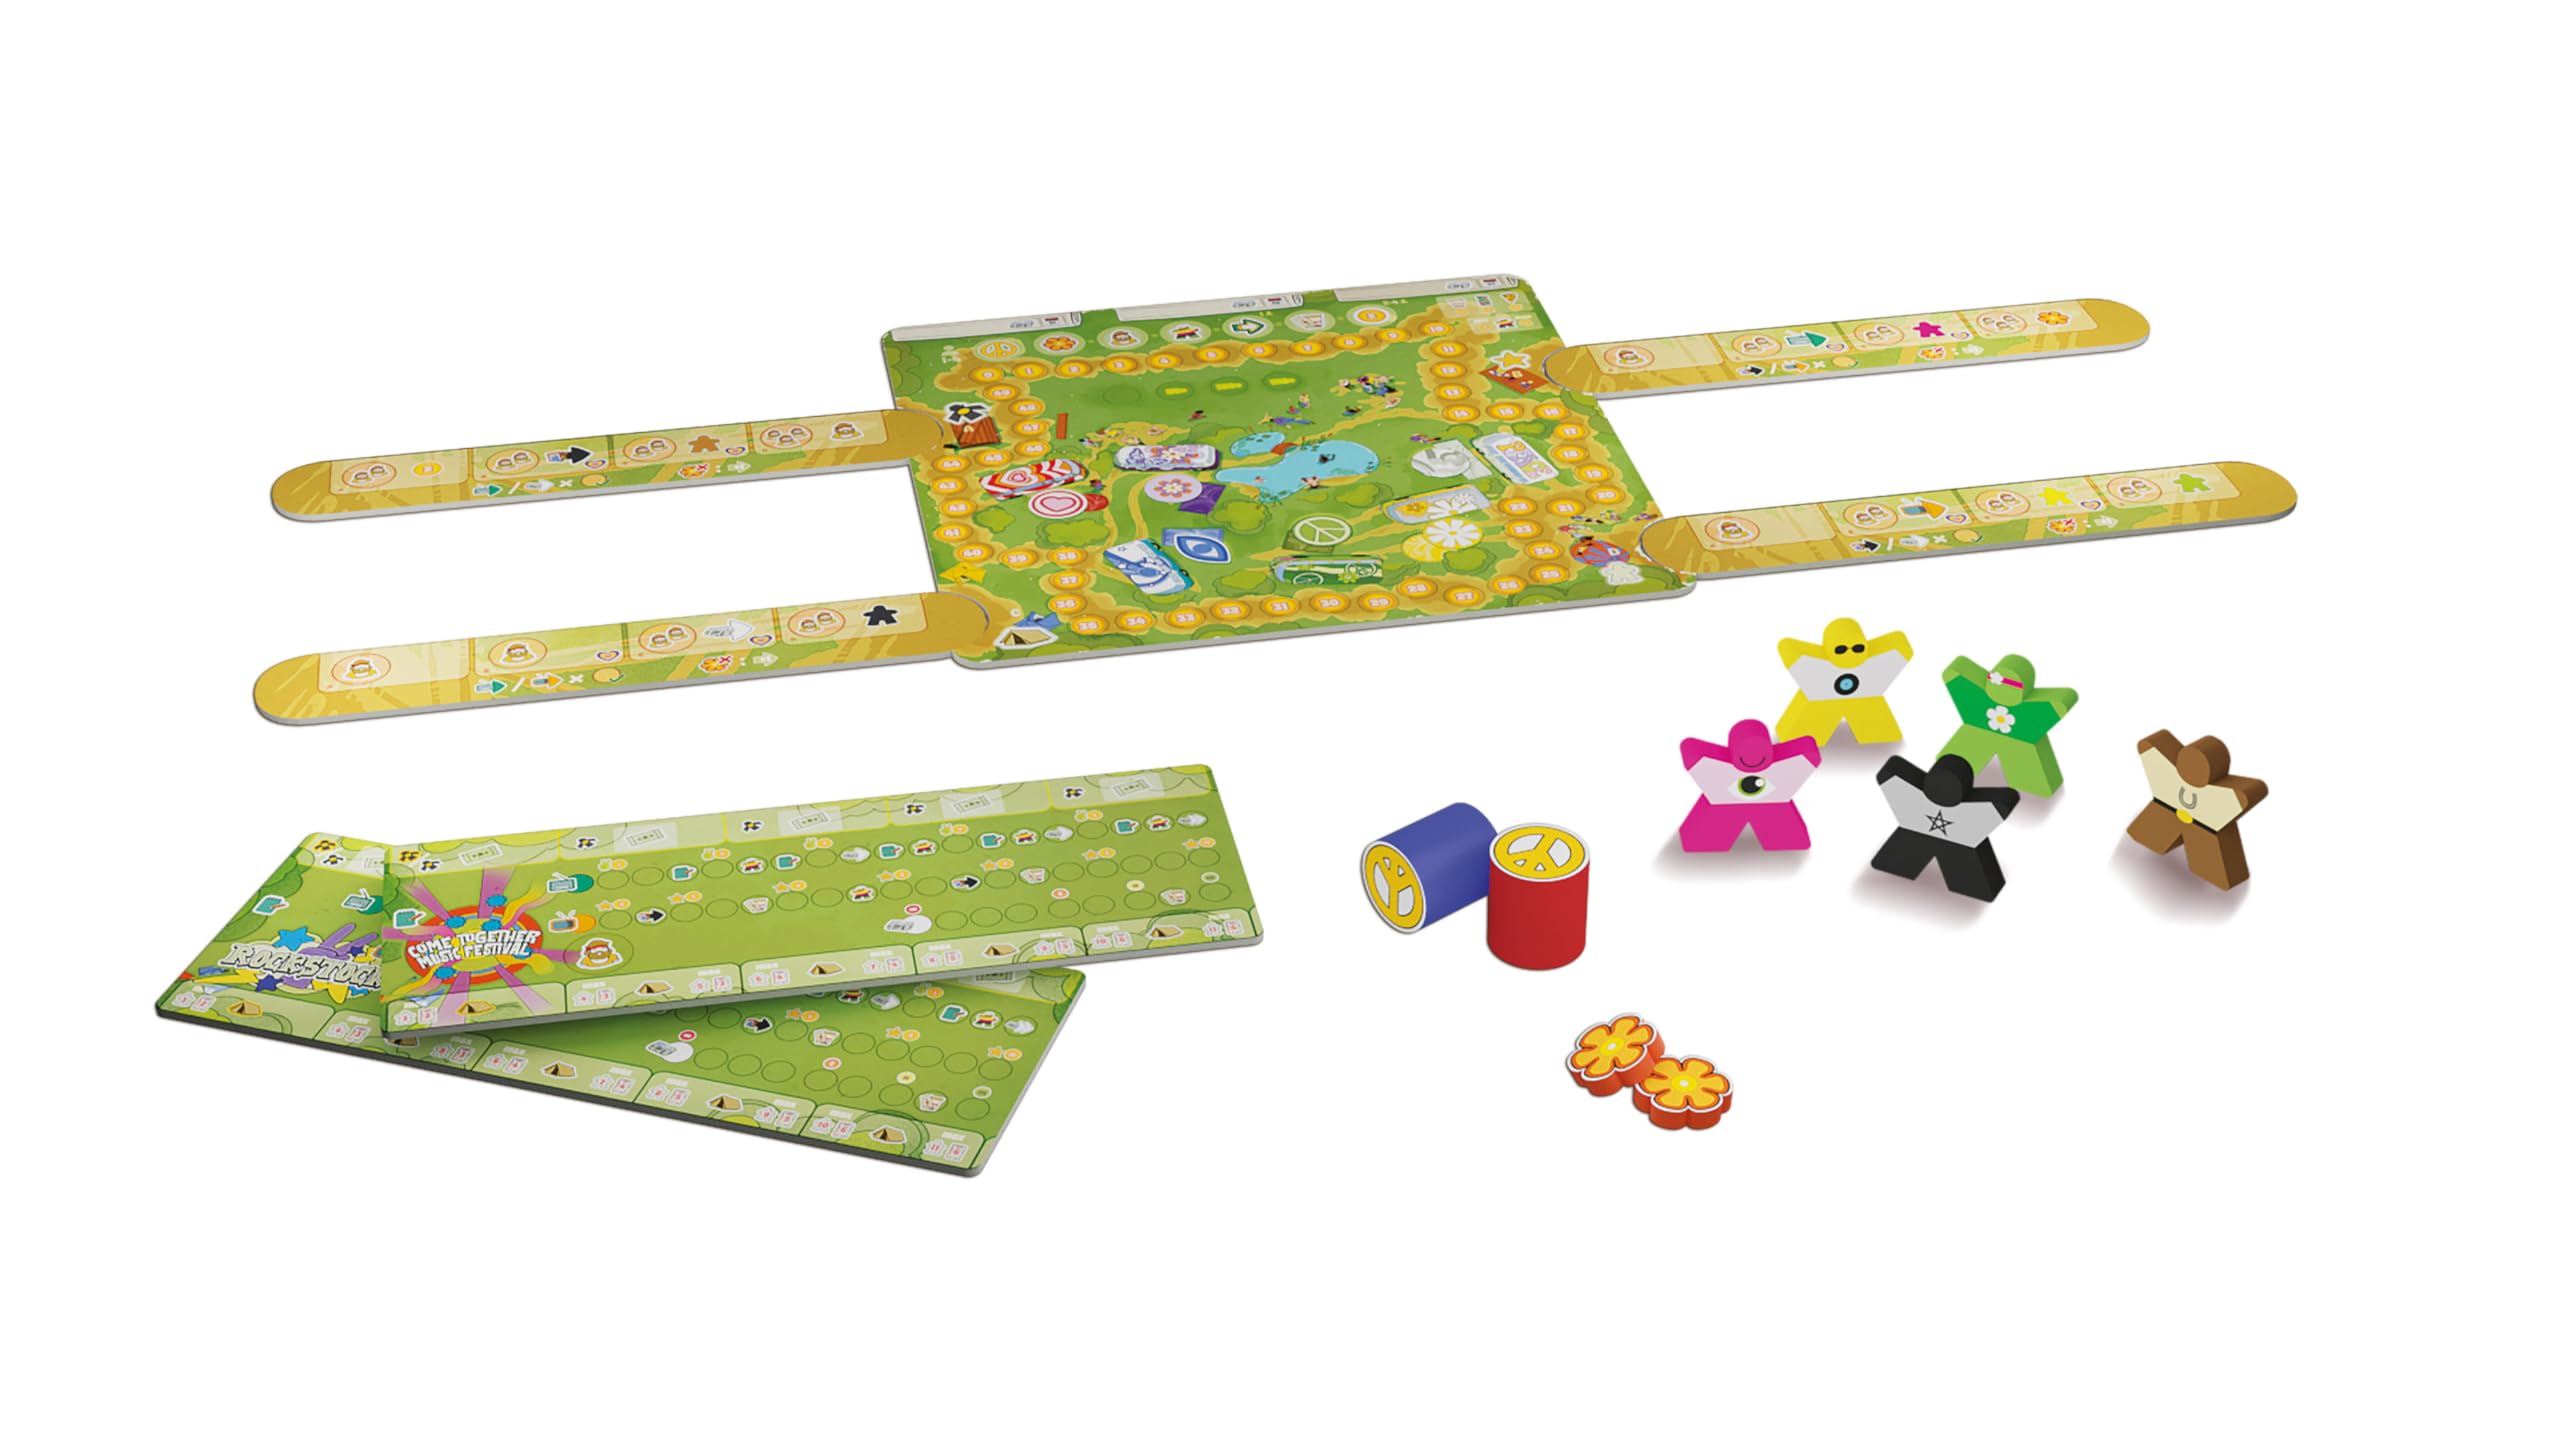 Come Together Board Game - Create The Ultimate Music Festival Experience! Fun Strategy Game for Kids and Adults, Ages 12+, 1-6 Players, 60-90 Minute Playtime, Made by Chilifox Games